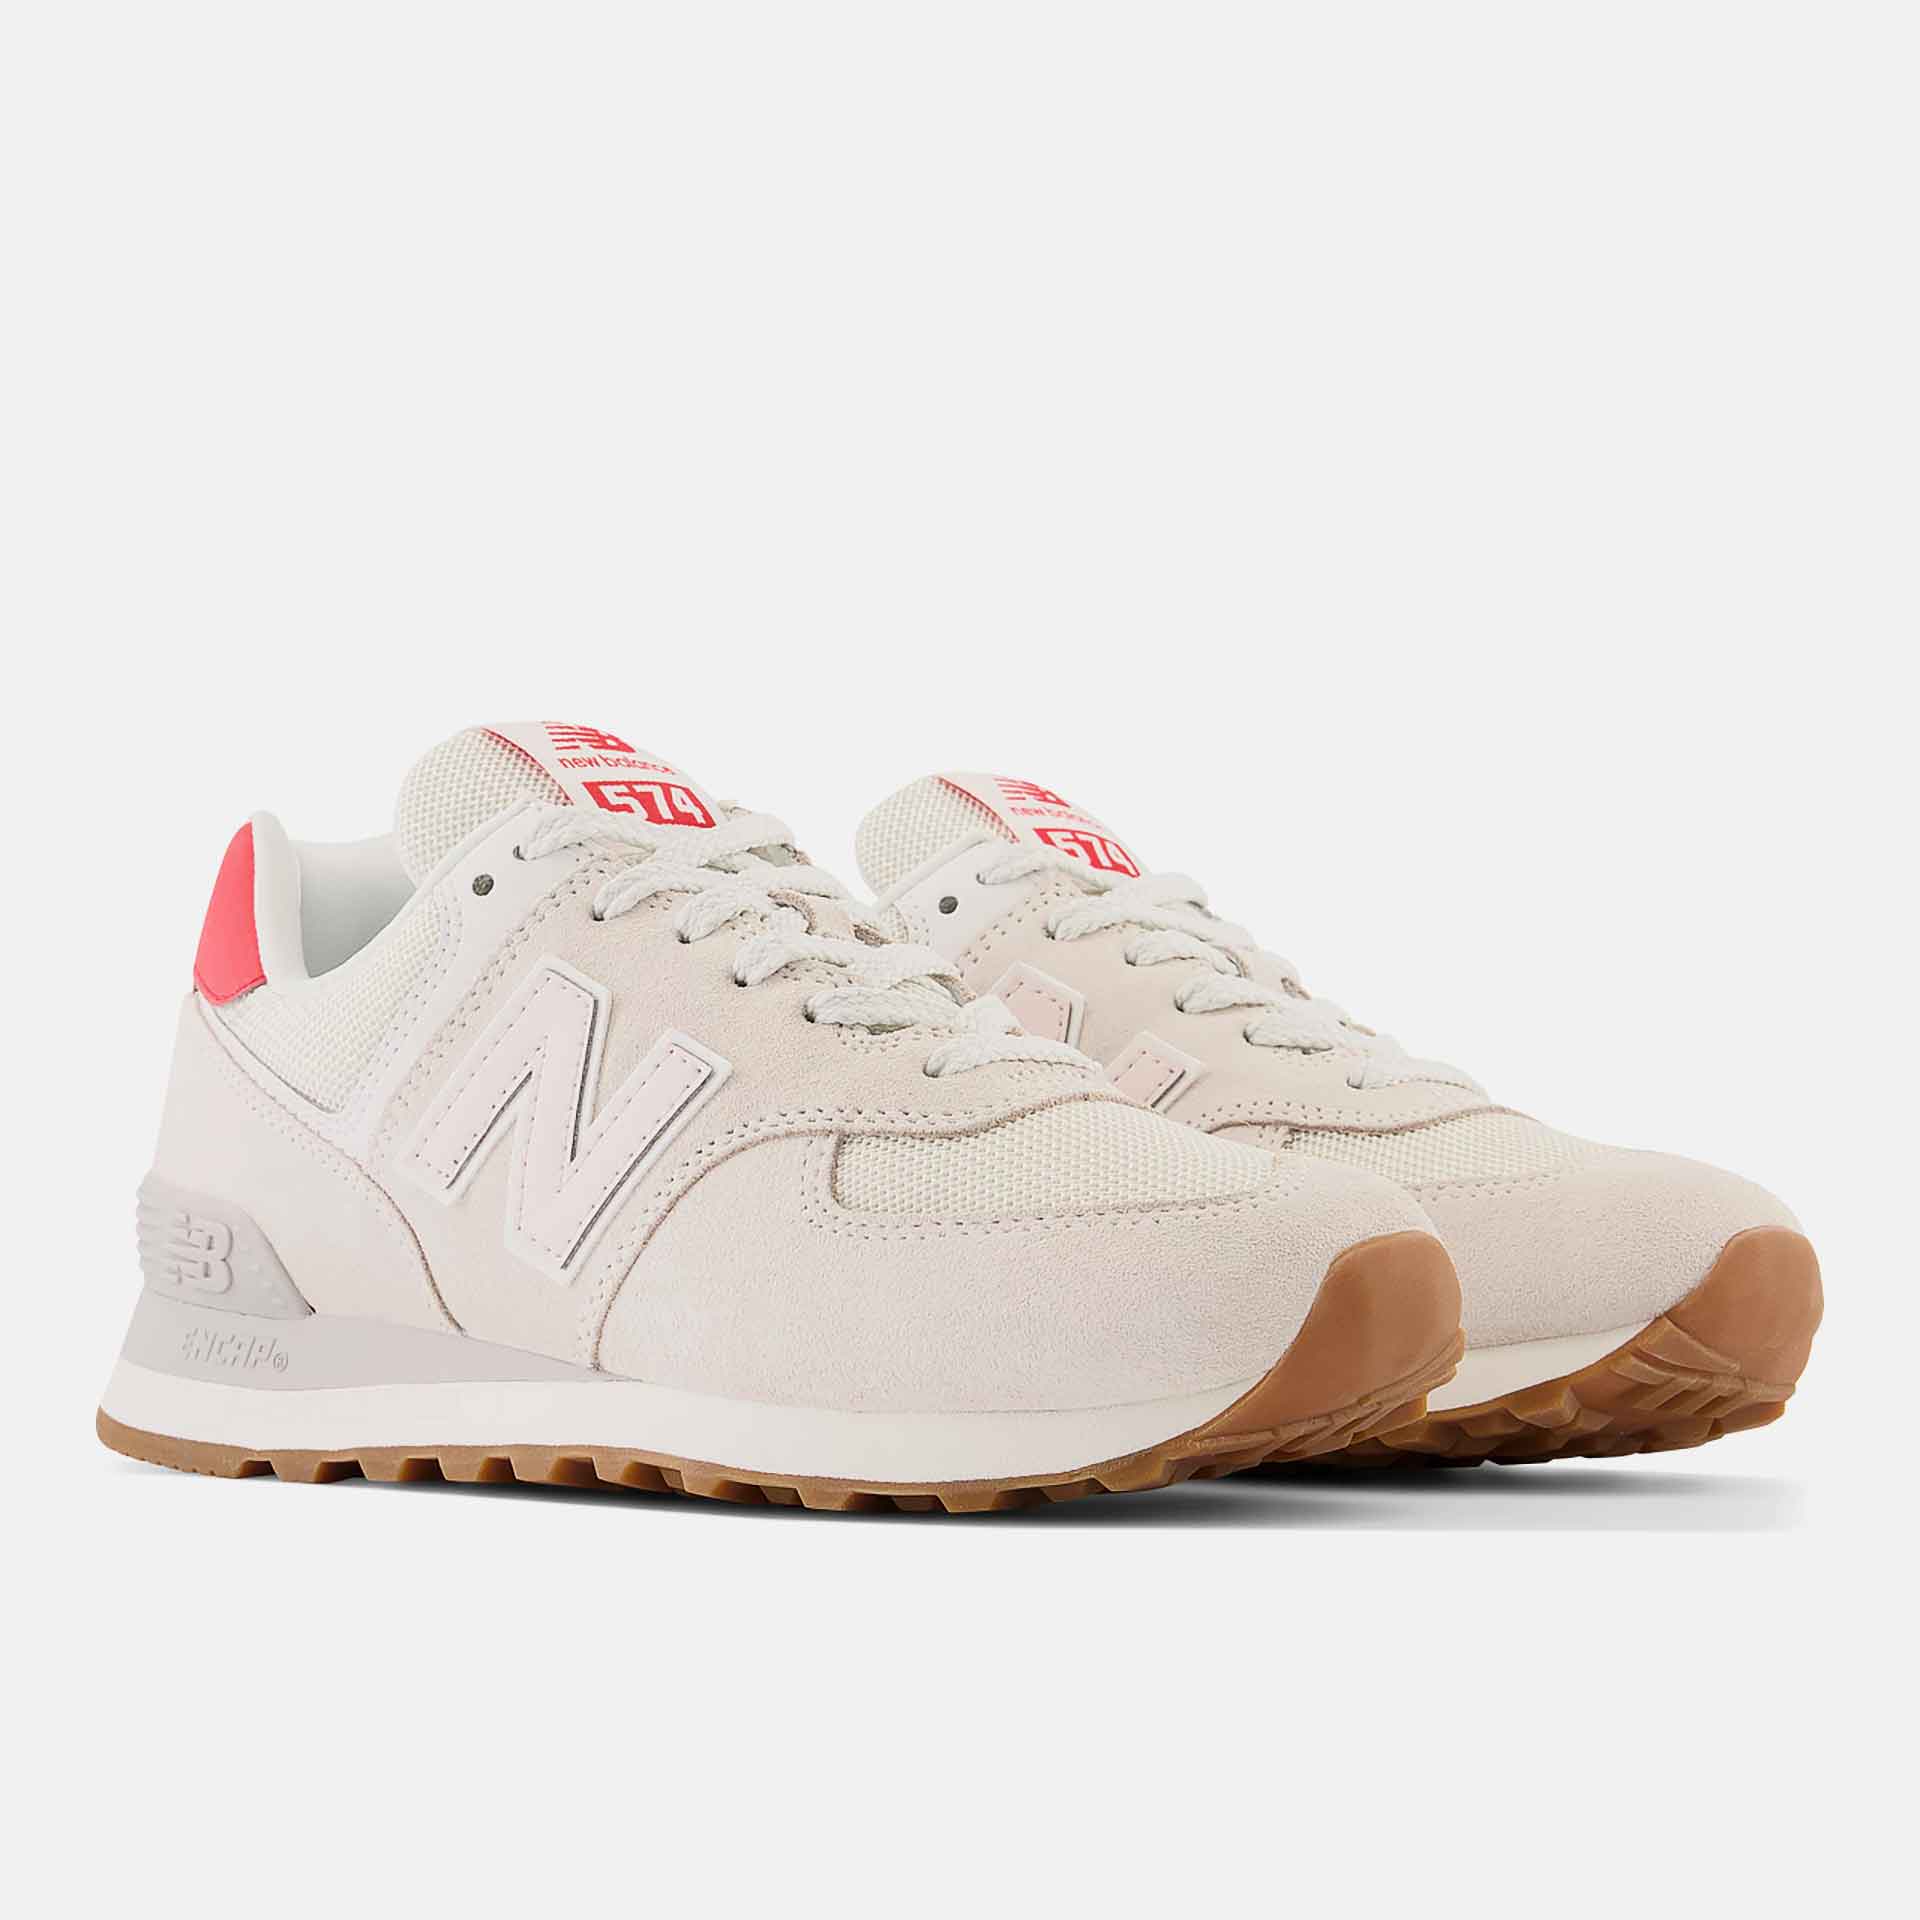 New Balance WL574RC Sneaker Reflection/Washed Pink